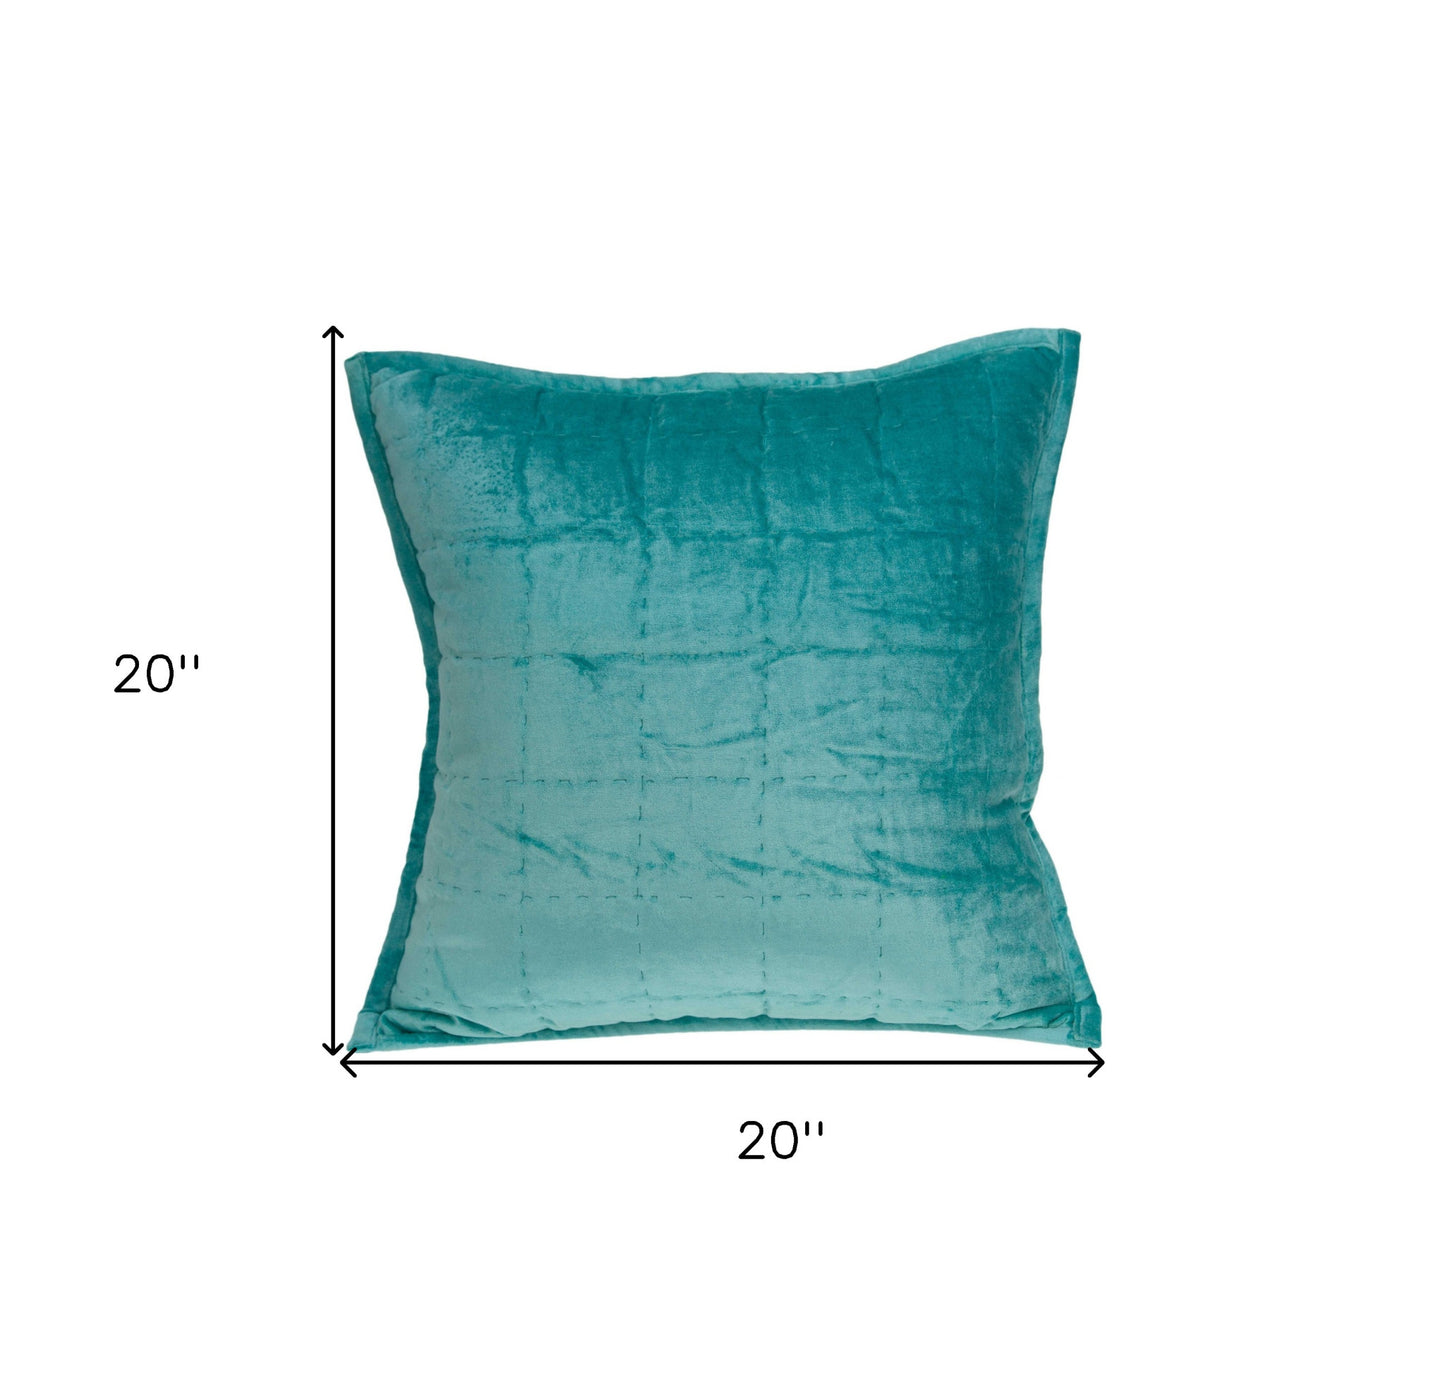 20" X 7" X 20" Transitional Aqua Solid Quilted Pillow Cover With Poly Insert